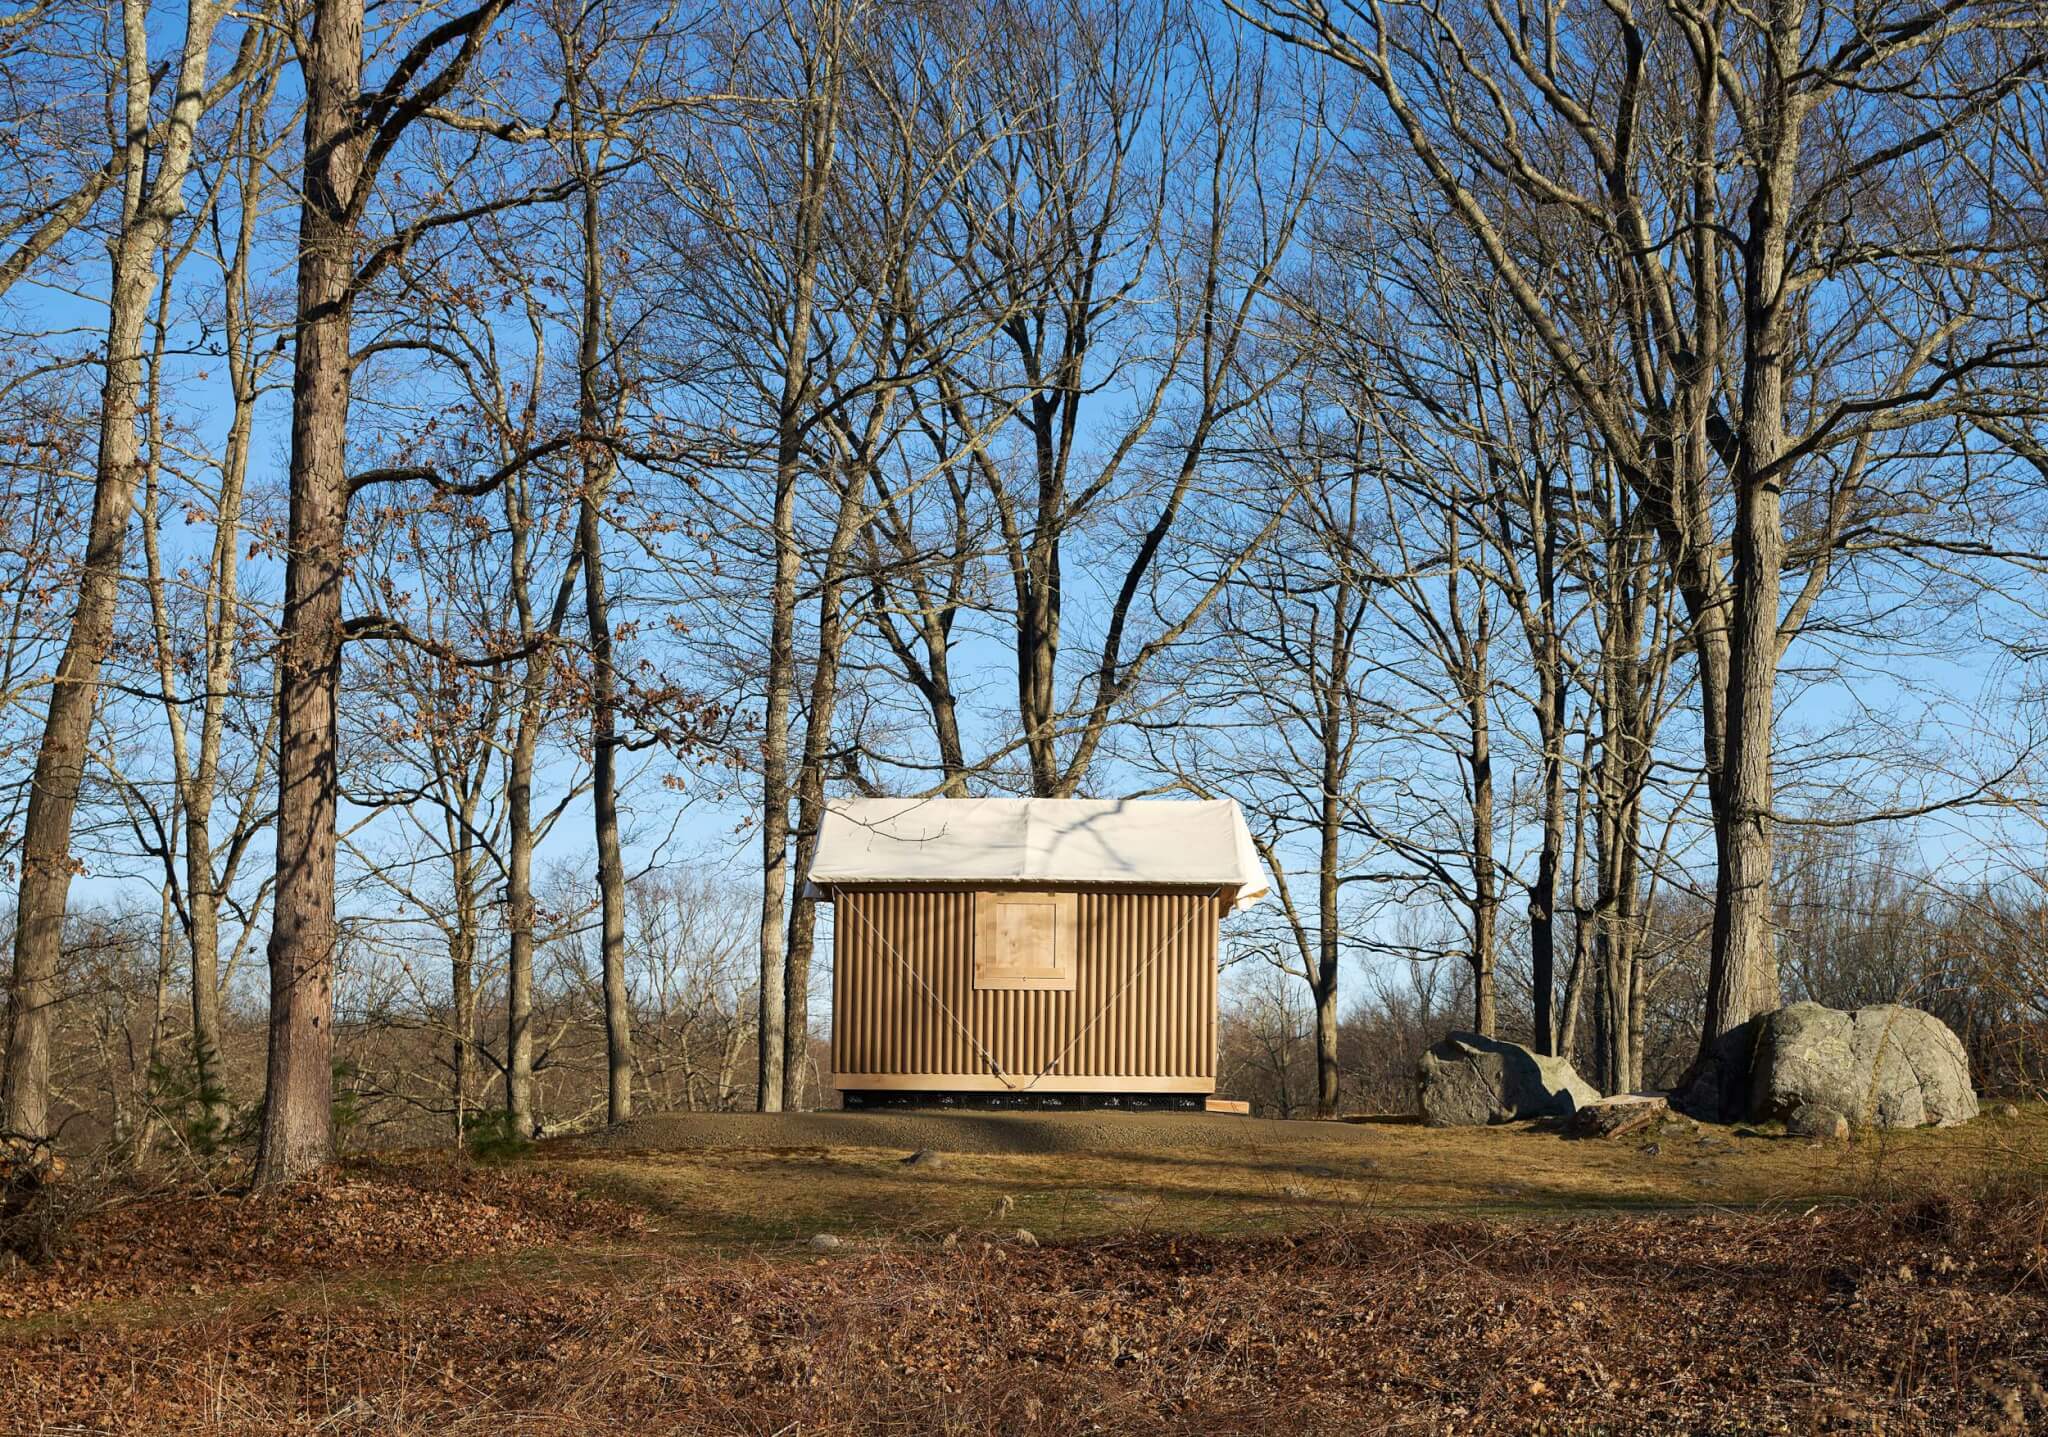 The Paper Log House is installed at Philip Johnson’s Glass House